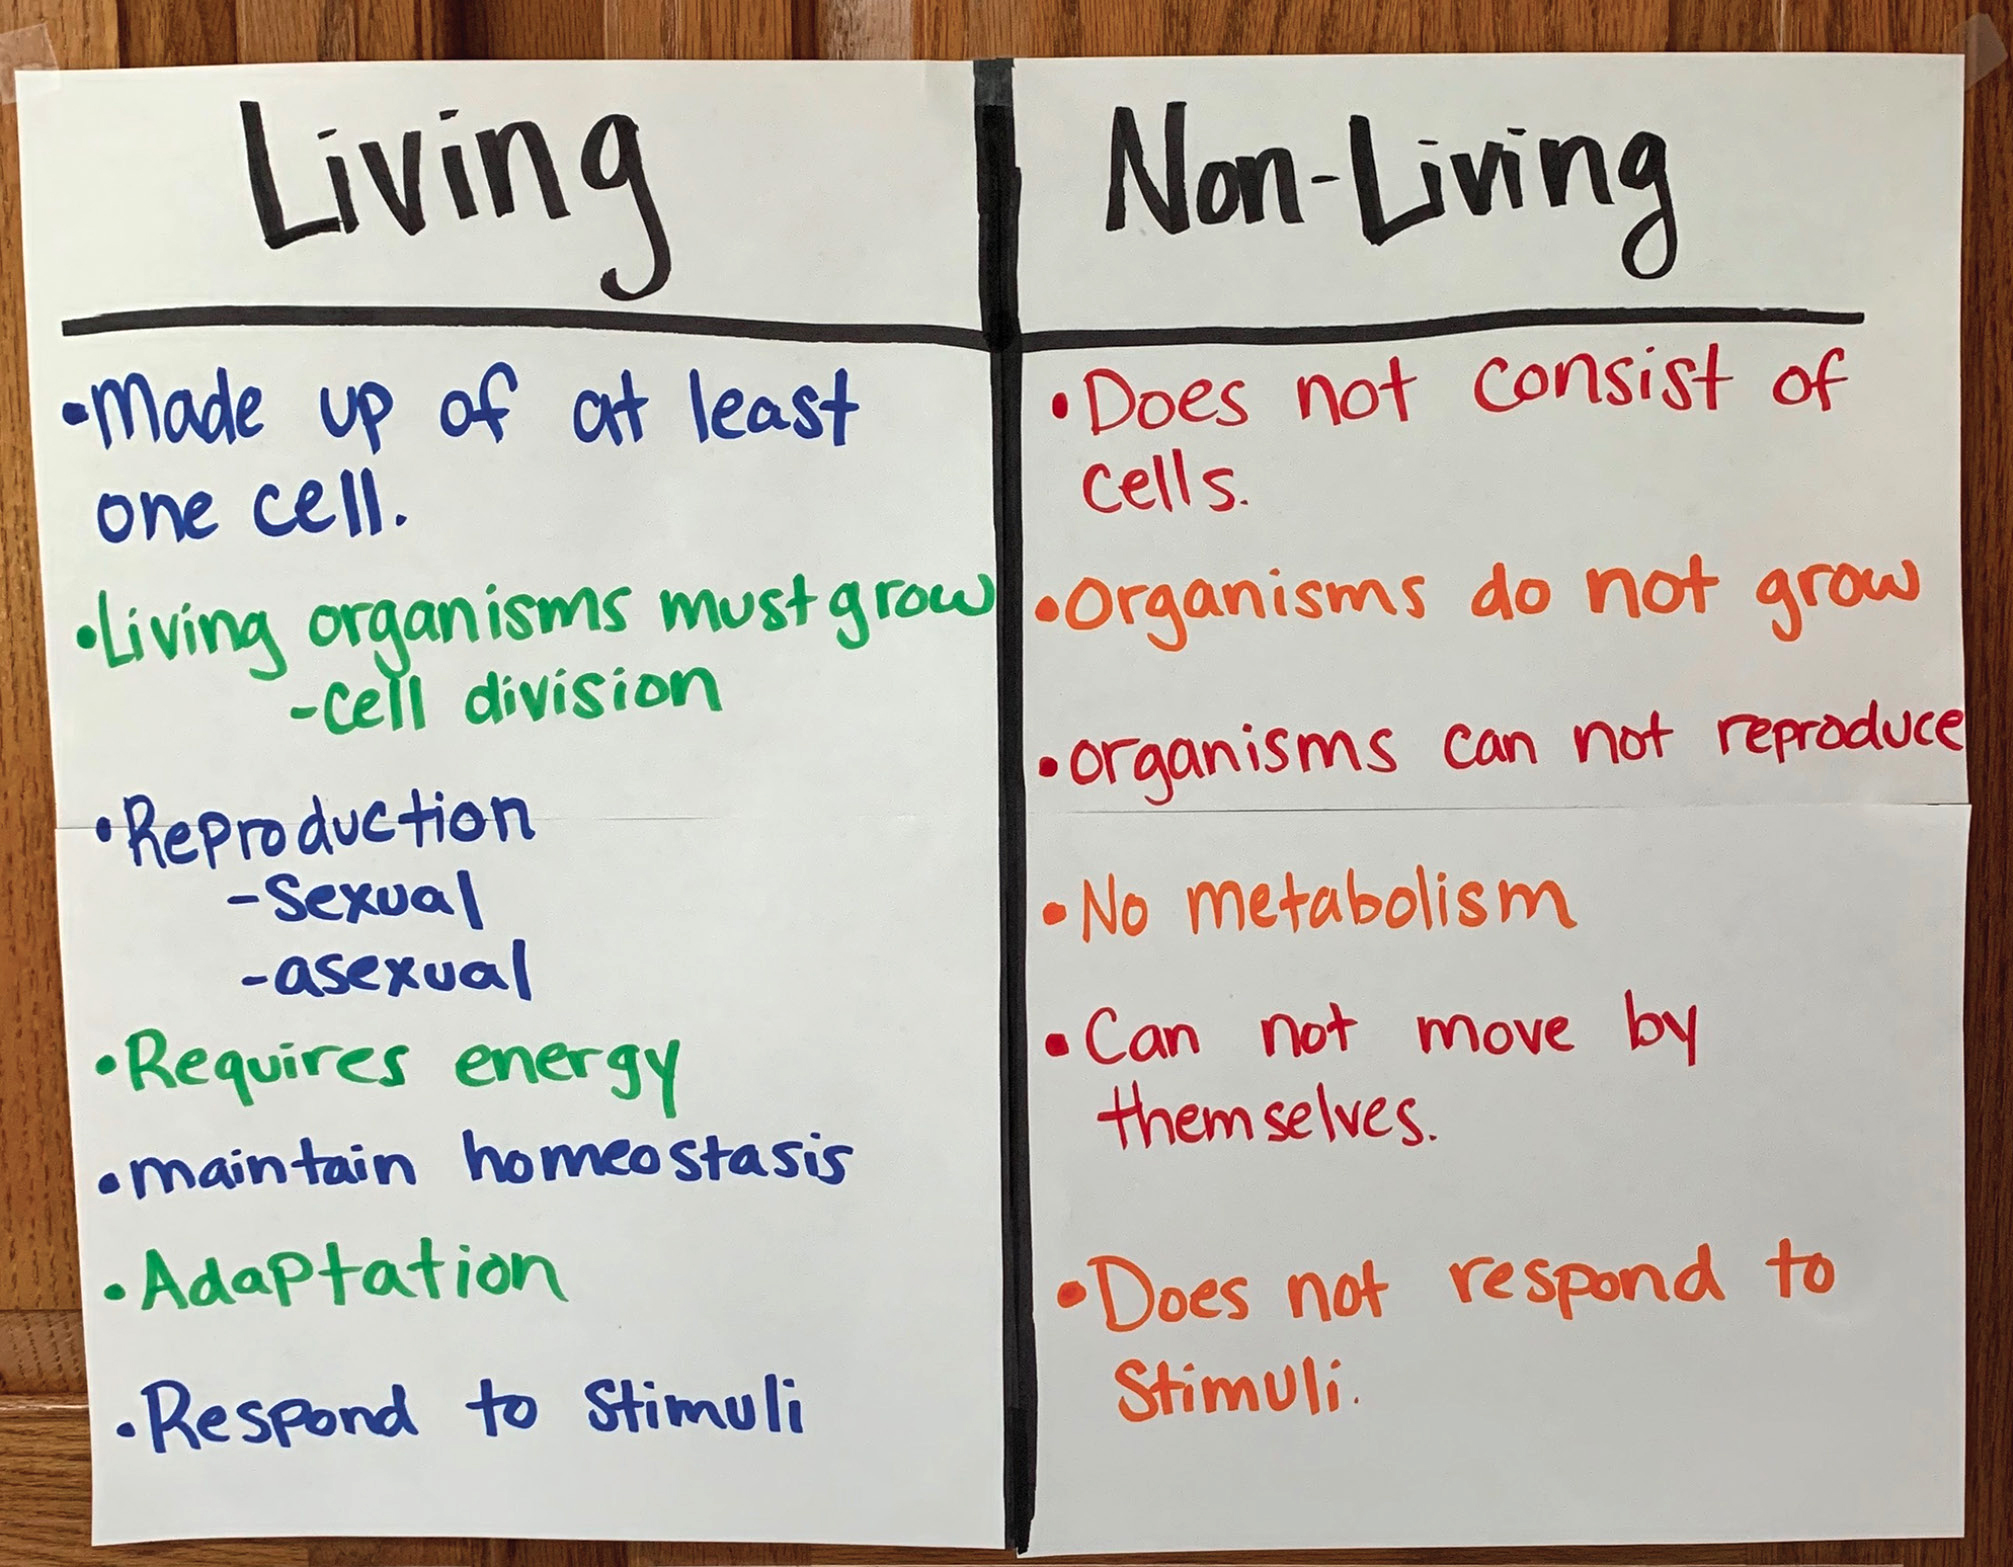 T table contrasting living and nonliving organisms.